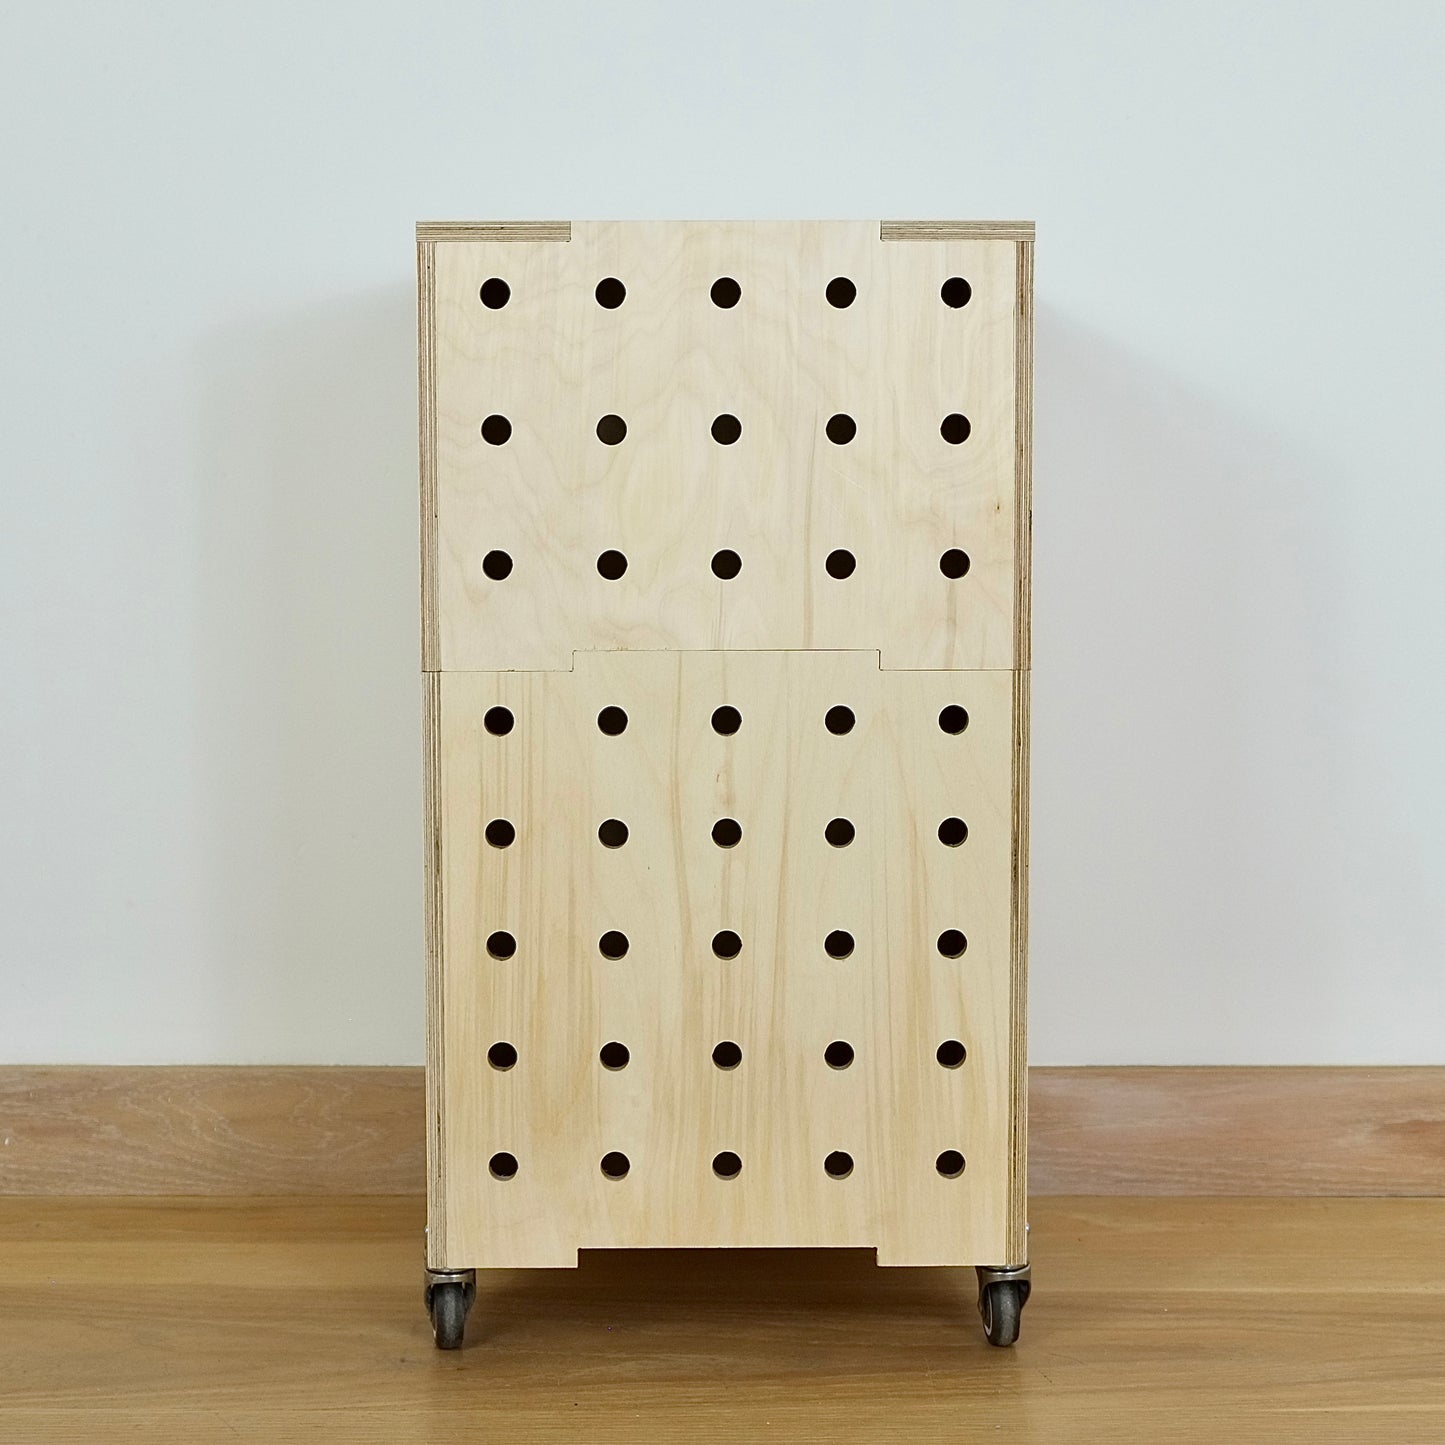 Stack of two simple pale wooden square shaped storage crates facing front on , with eight rows of holes cut in the front facet, castors and a wooden lid, sitting on a wooden floor.